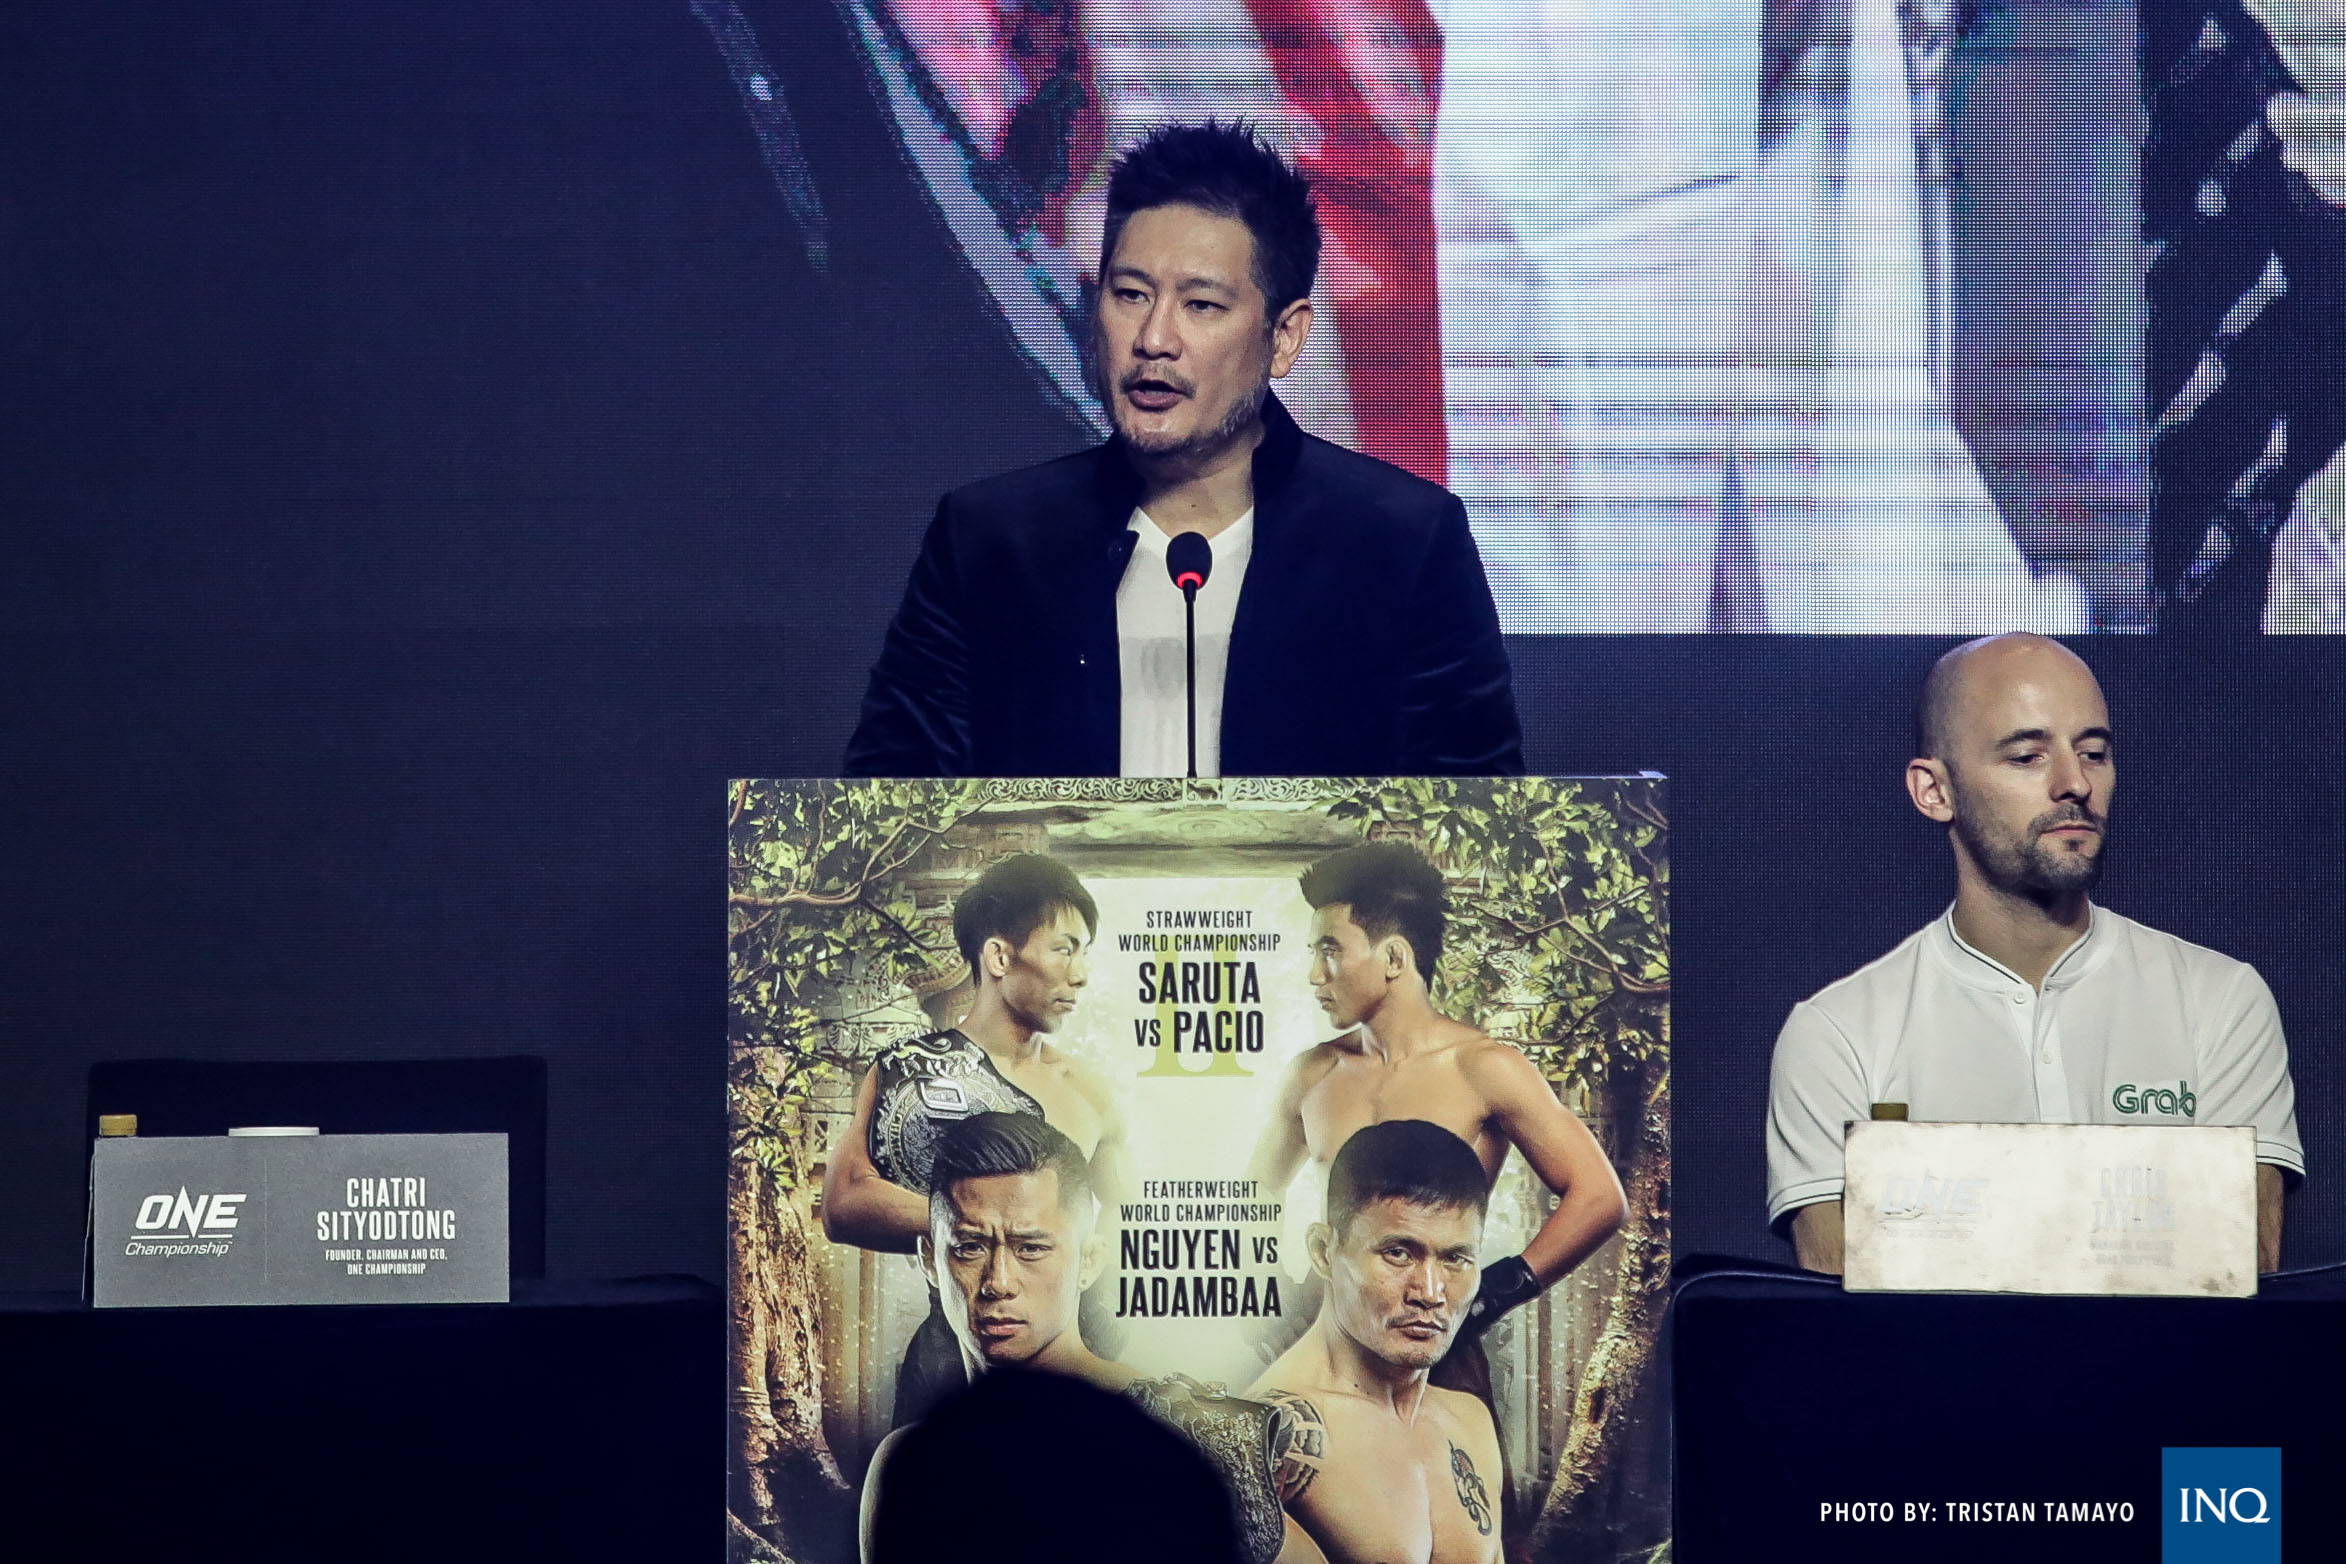 Chatri Sityodtong, ONE CEO